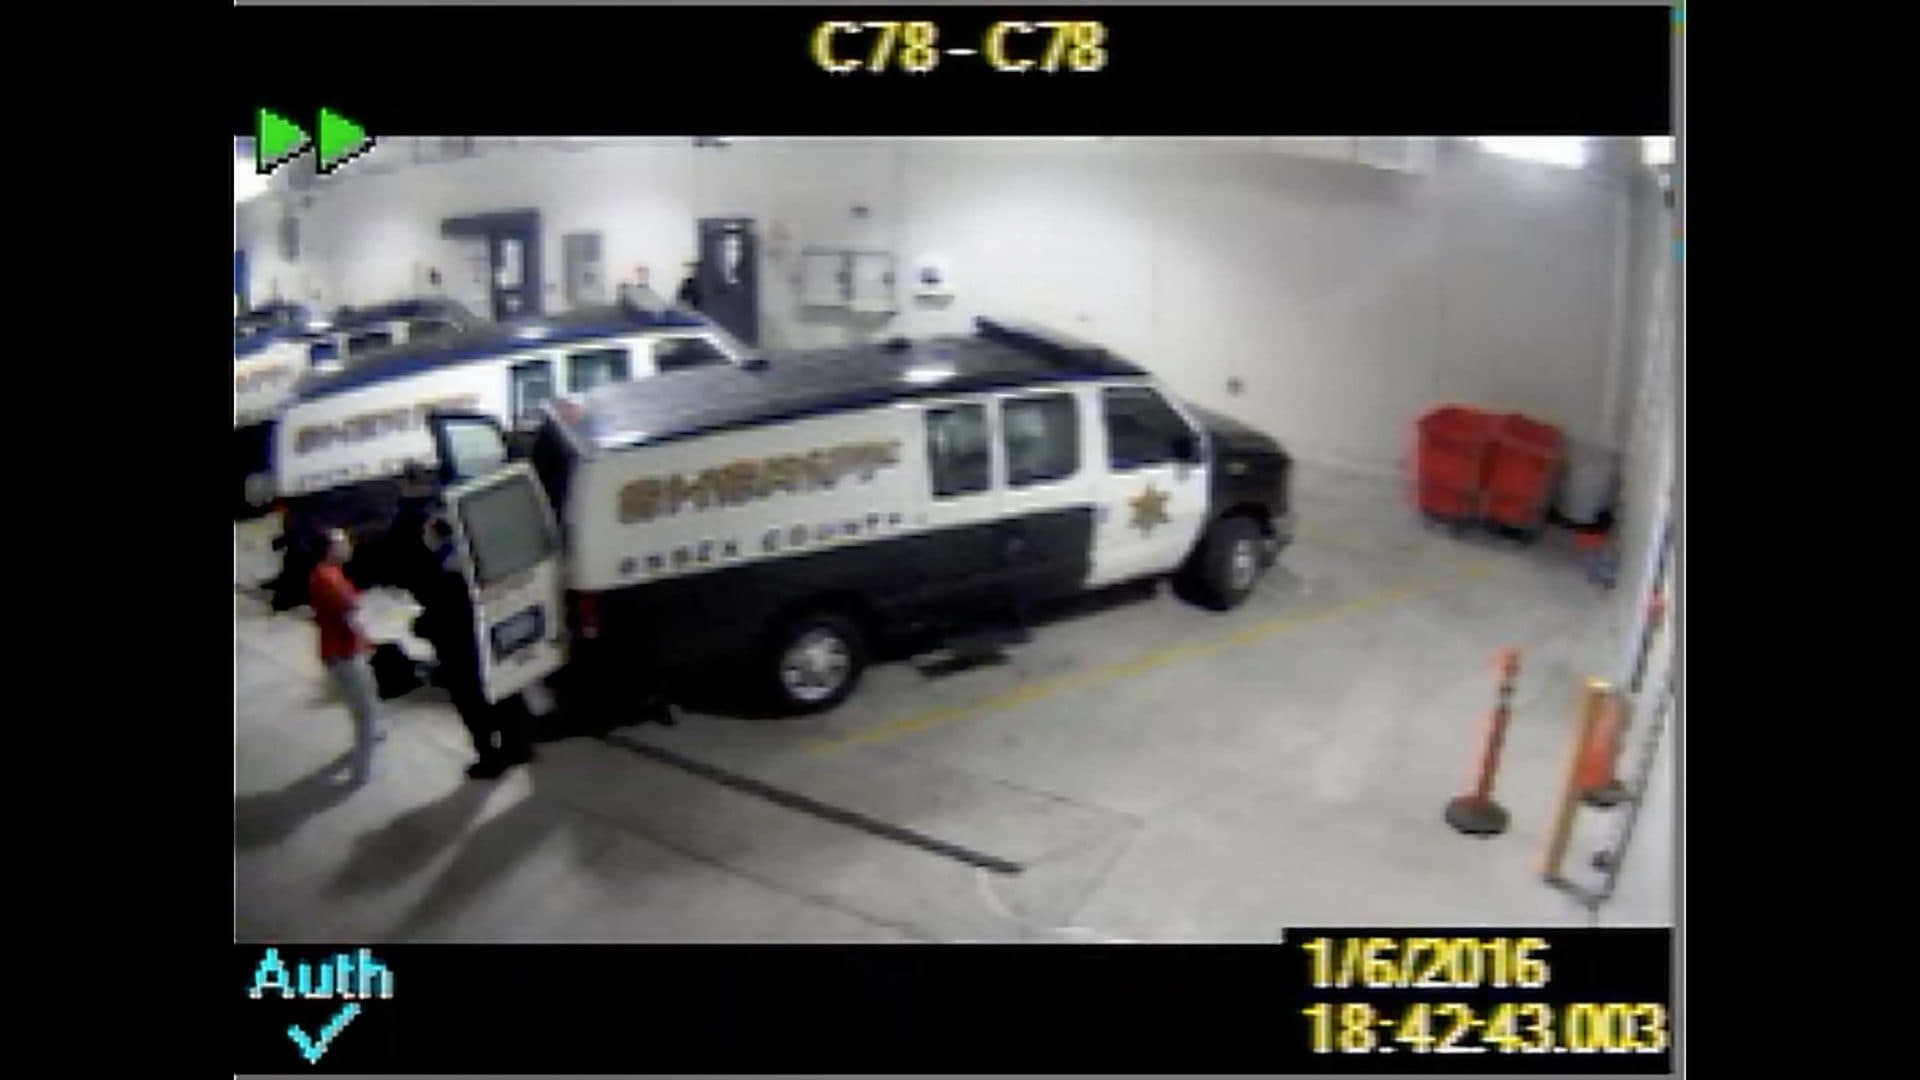 A screenshot from jail video shows Sam Dunn, in the red shirt, being loaded into a transport van to go to a Bridgewater treatment center. (Courtesy Essex County sheriff’s office)